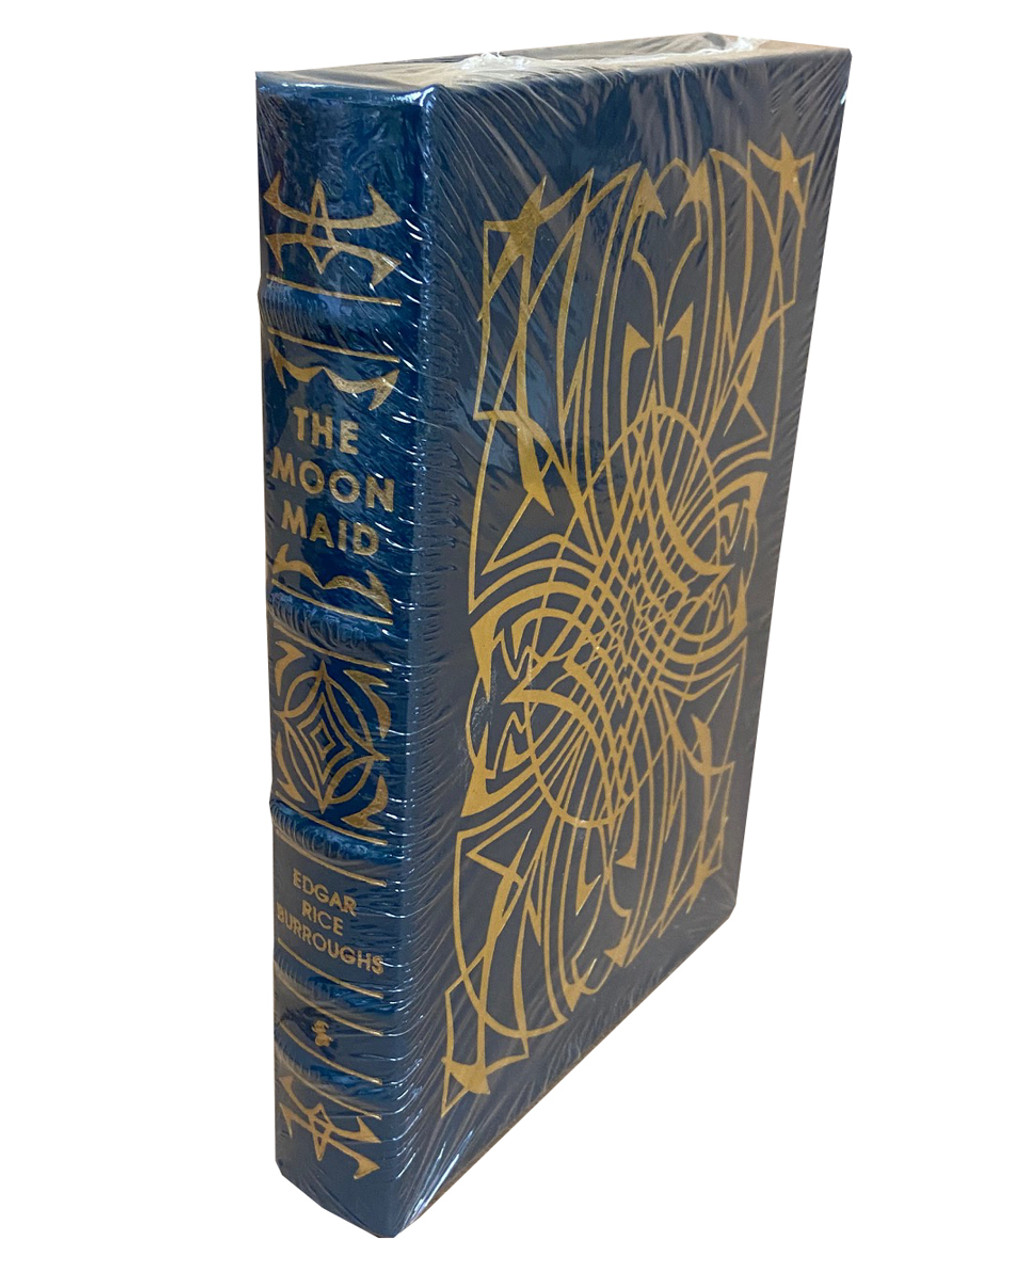 Edgar Rice Burroughs "The Moon Maid" Deluxe Limited Edition, Leather Bound Collector's Edition [Sealed]